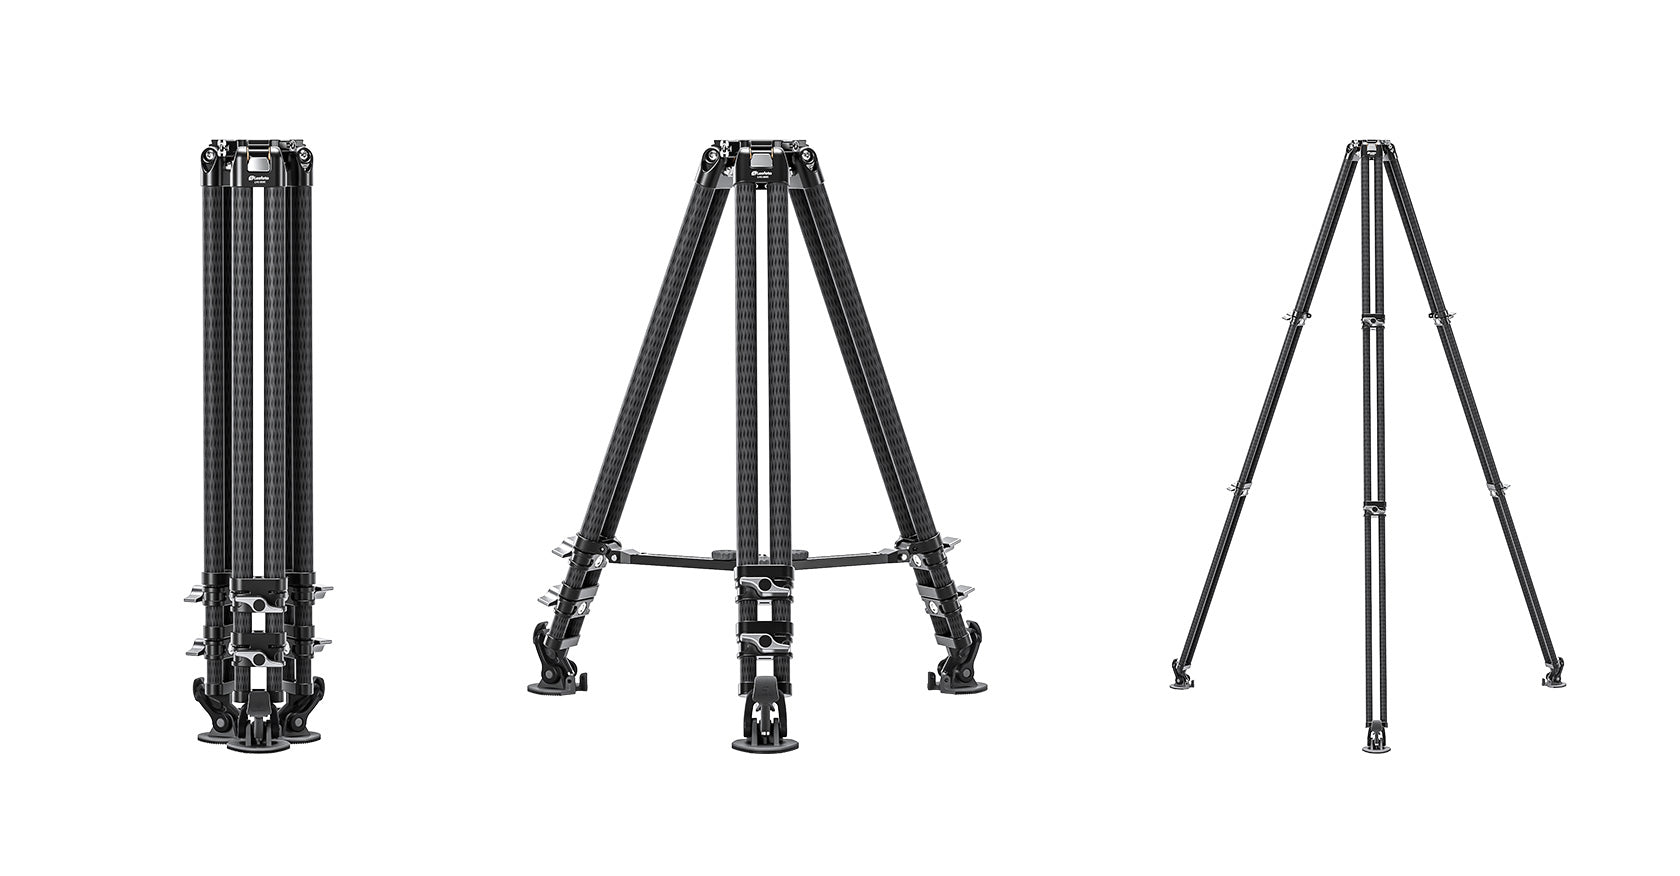 Leofoto LVC-193C+BV-15 Dual-Tube Video Tripod with Fluid Head Set  | 75mm Integrated Bowl with Leveling Base and Handle